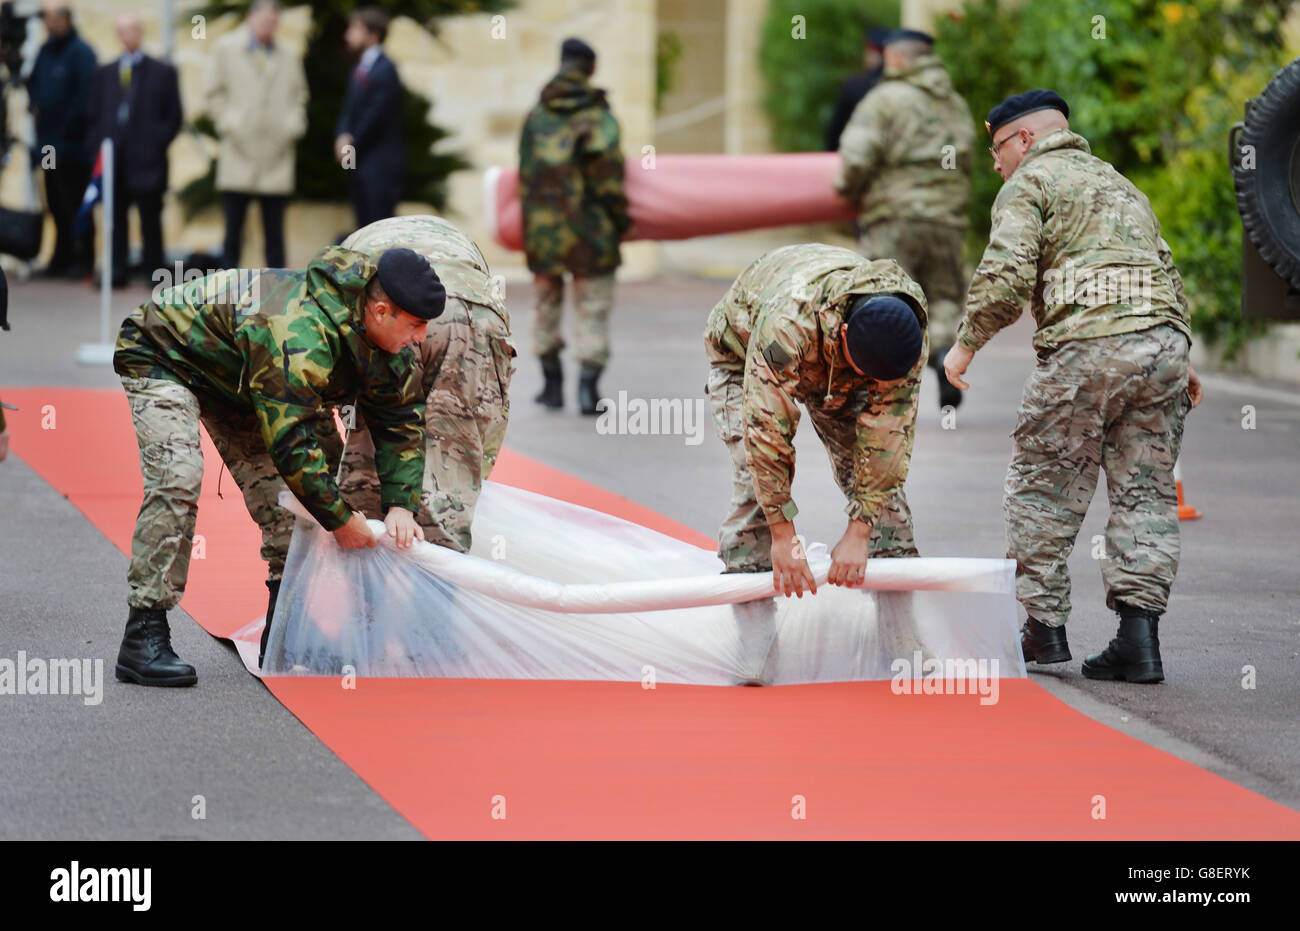 A group of Maltese Soldiers unwrap the red carpet in preparation for the arrival of Queen Elizabeth II and the Duke of Edinburgh at the San Anton Palace for her visit to the island of Malta. Stock Photo